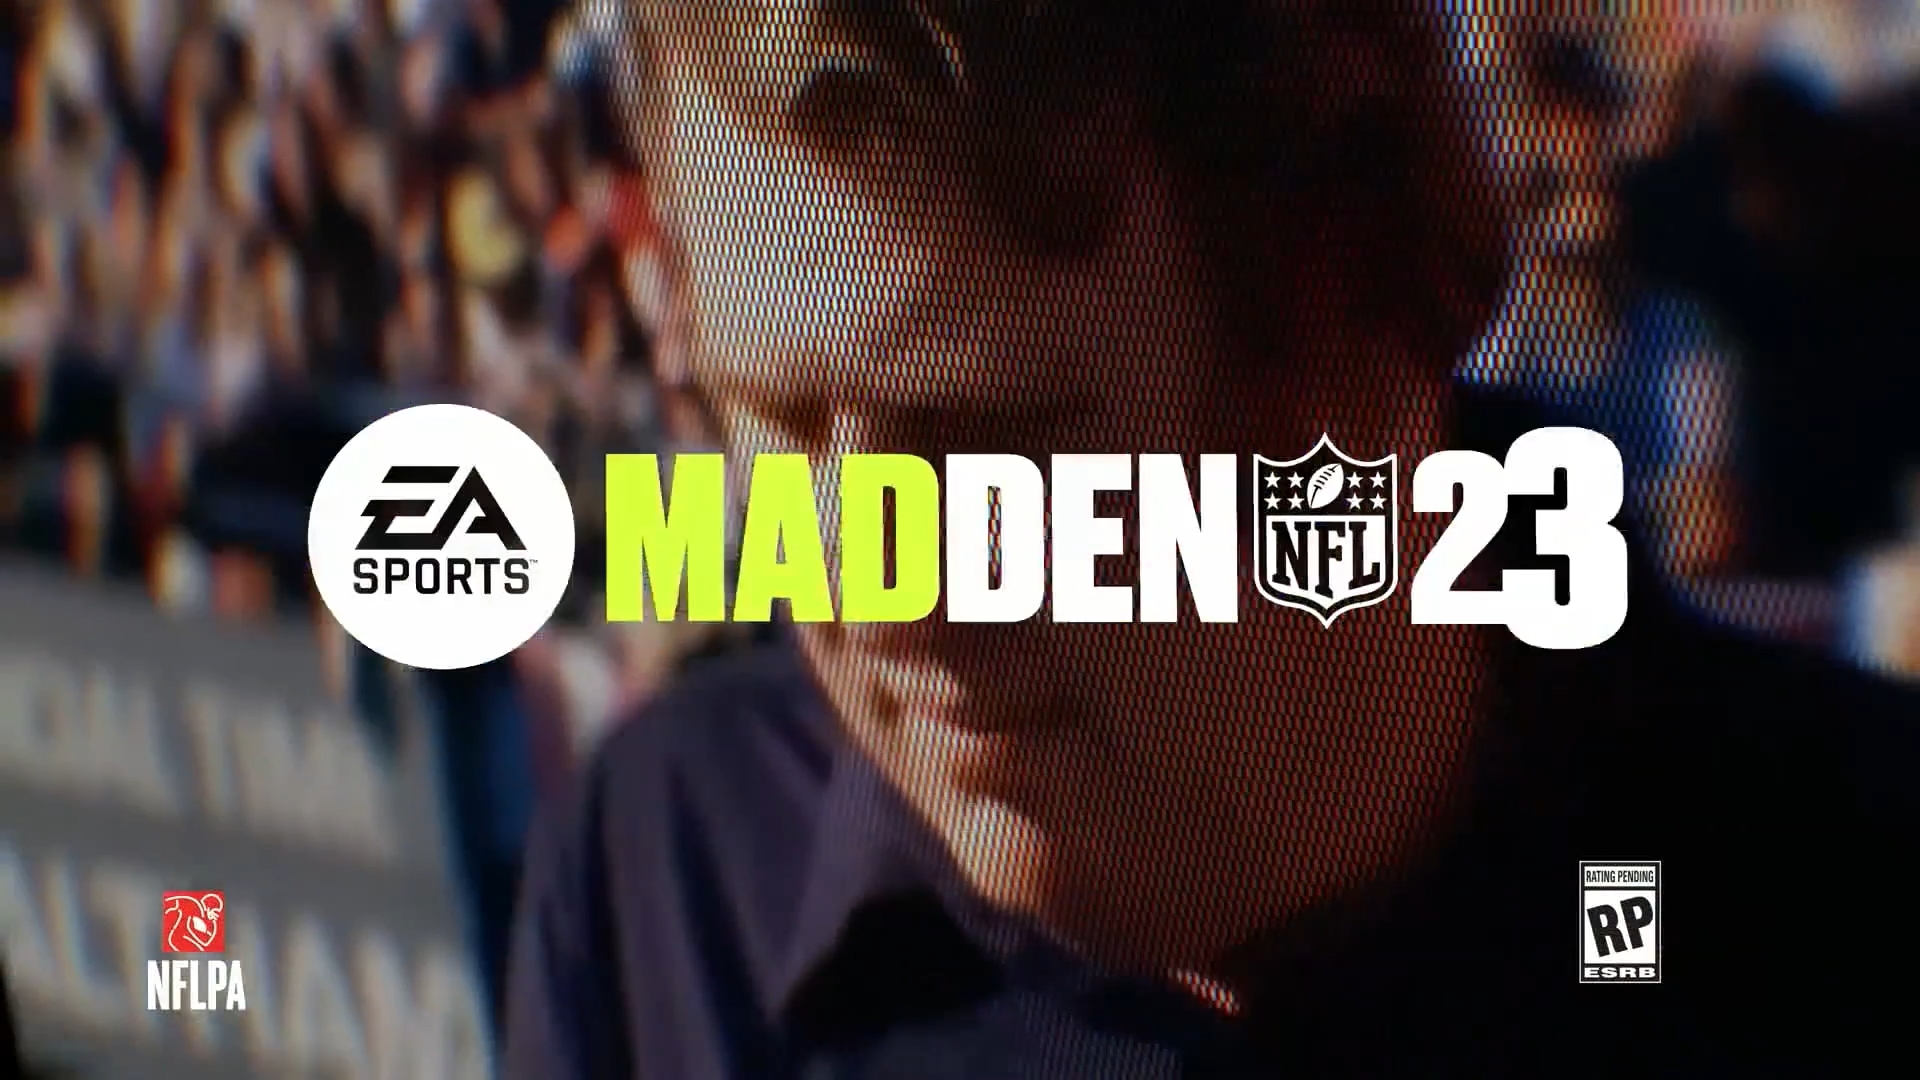 Cover art for the video game Madden NFL 23, featuring text that reads "EA Sports Madden NFL 23" with logos for EA Sports and the NFL. In the background is a close-up image of a person with blurred stadium crowd in the background. The game is rated "RP" for Rating Pending.